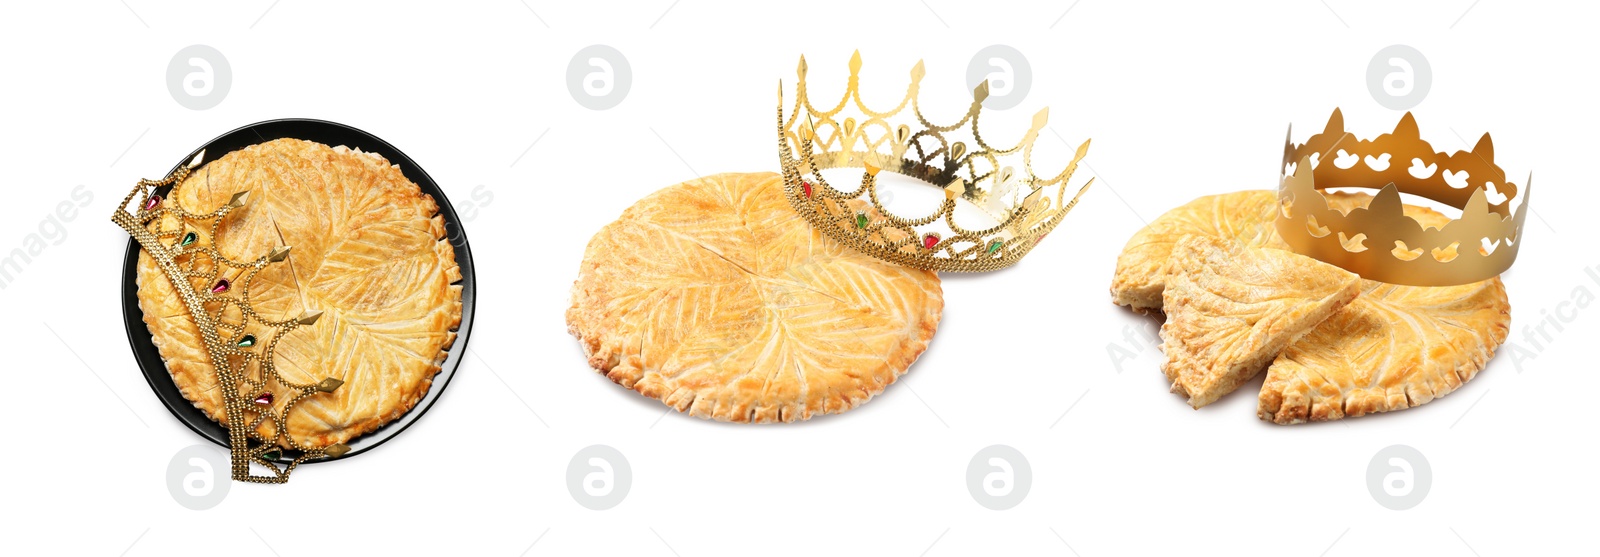 Image of Set of traditional delicious galettes des rois on white background. Banner design